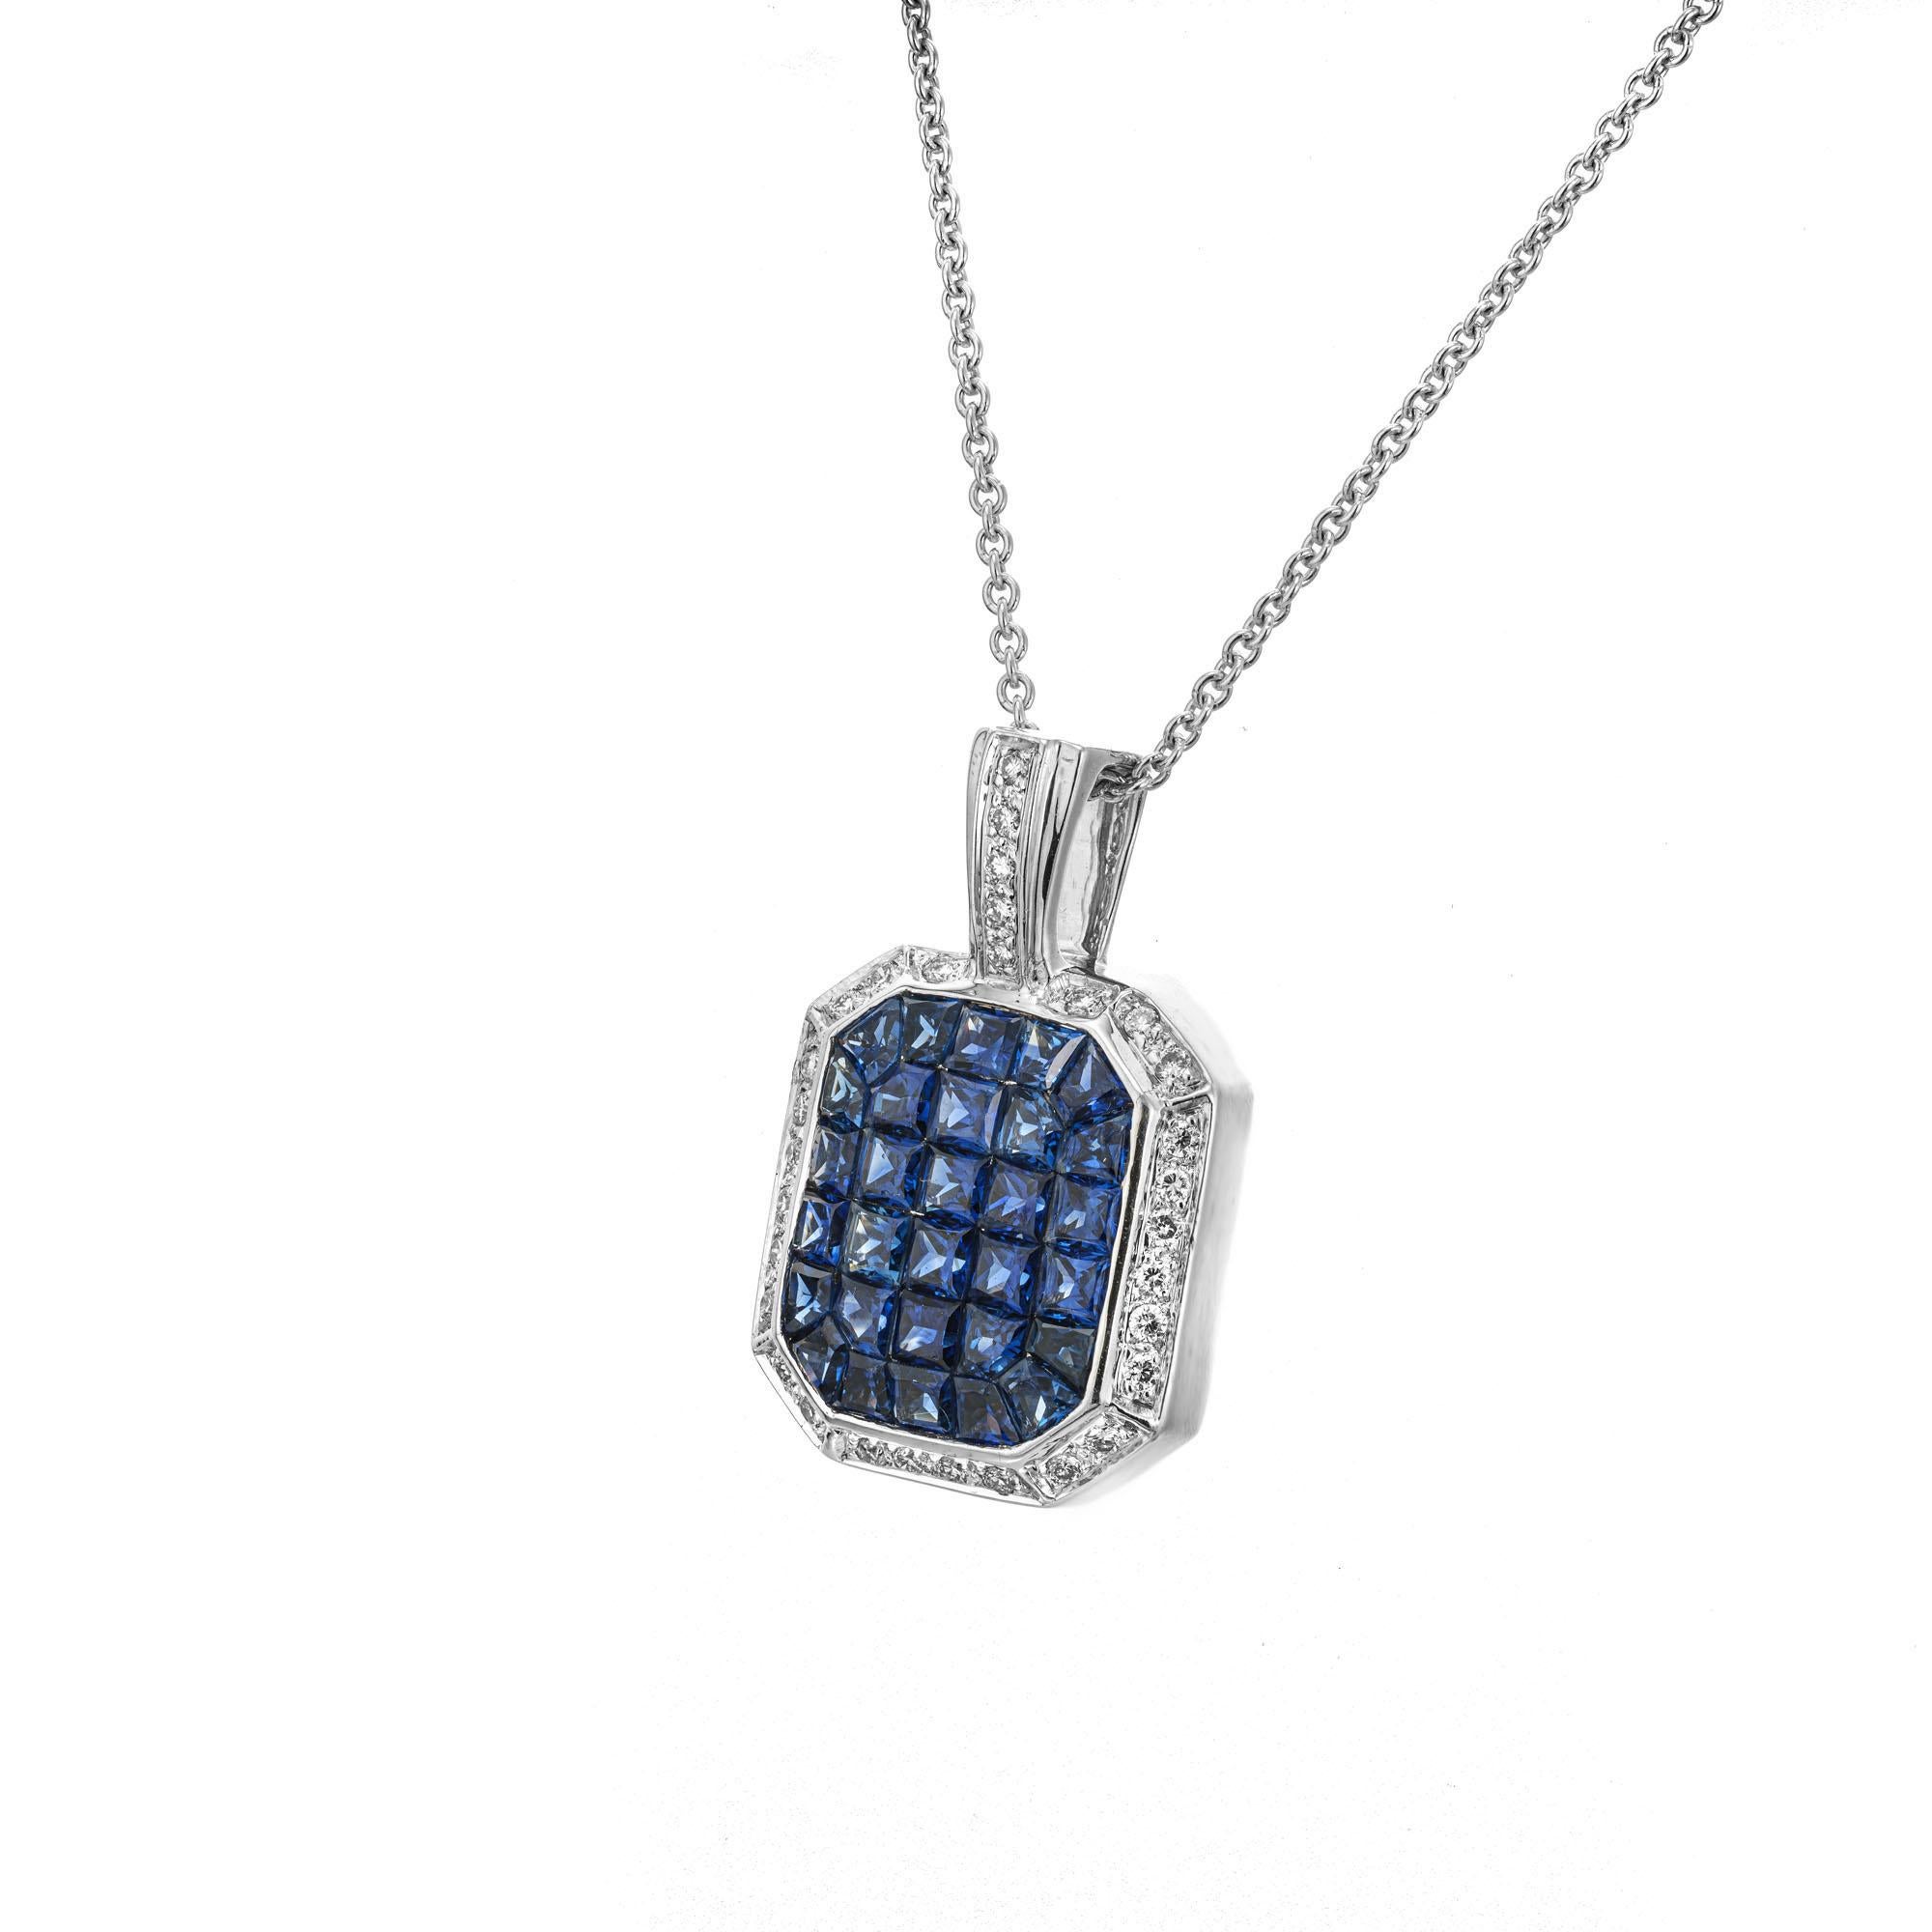 Eight sided Sapphire and diamond pendant necklace. 30 fancy cut invisible set Sapphires in a 18k white gold setting with a diamond halo and bail. 16 inches in length. Dilamani Gem Trading or Dilamani Designs is the maker. 

30 fancy cut sapphires